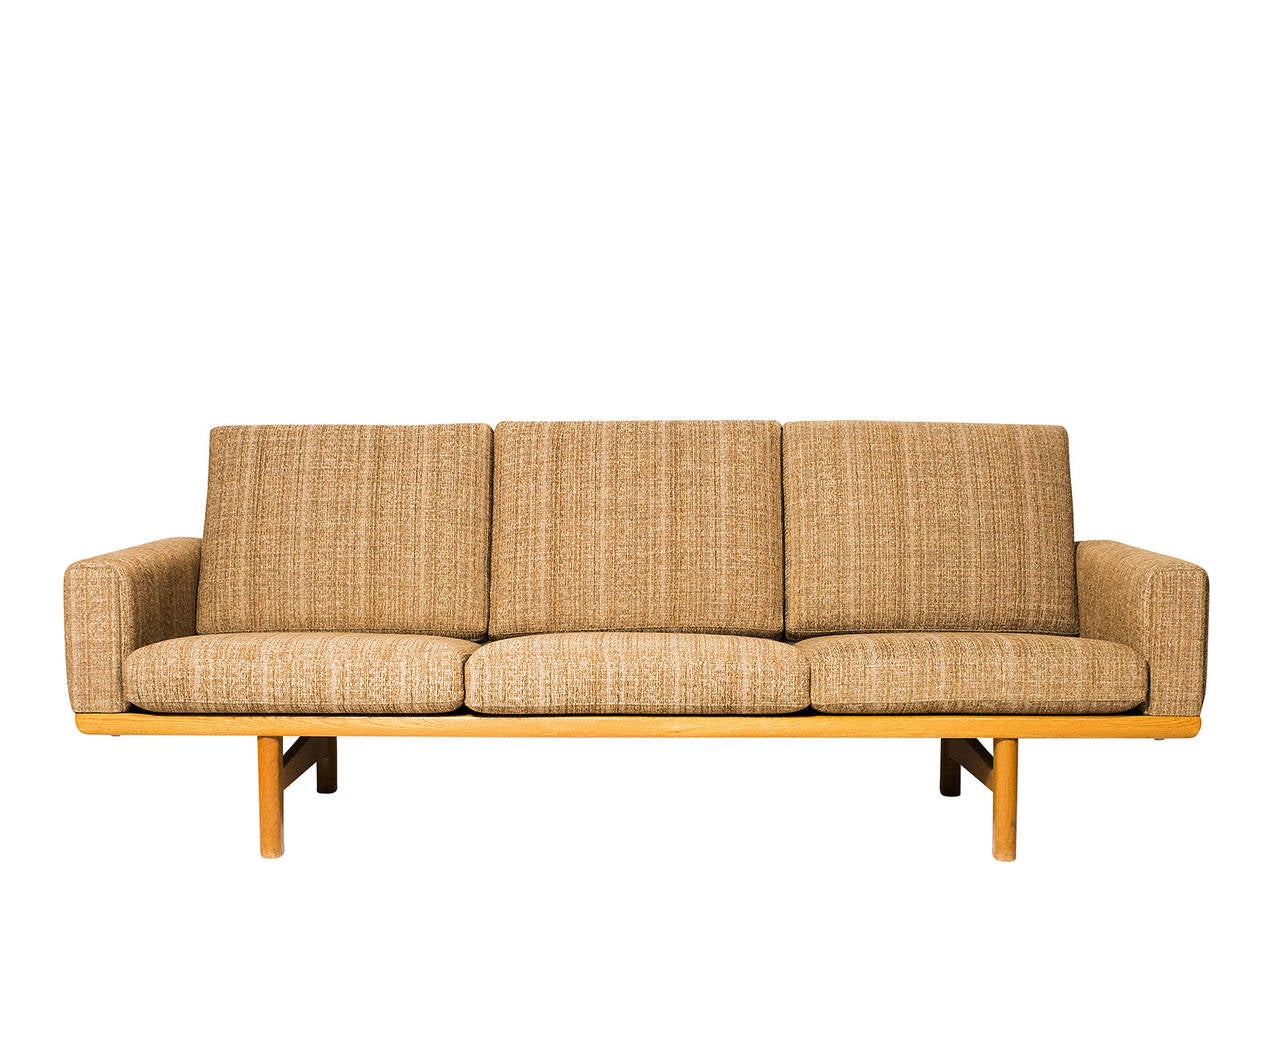 Hans Wegner GE-236 sofa designed in 1954 and produced by GETAMA. We have another one that we can reupholster for you. Send us your fabric.  Store formerly known as ARTFUL DODGER INC